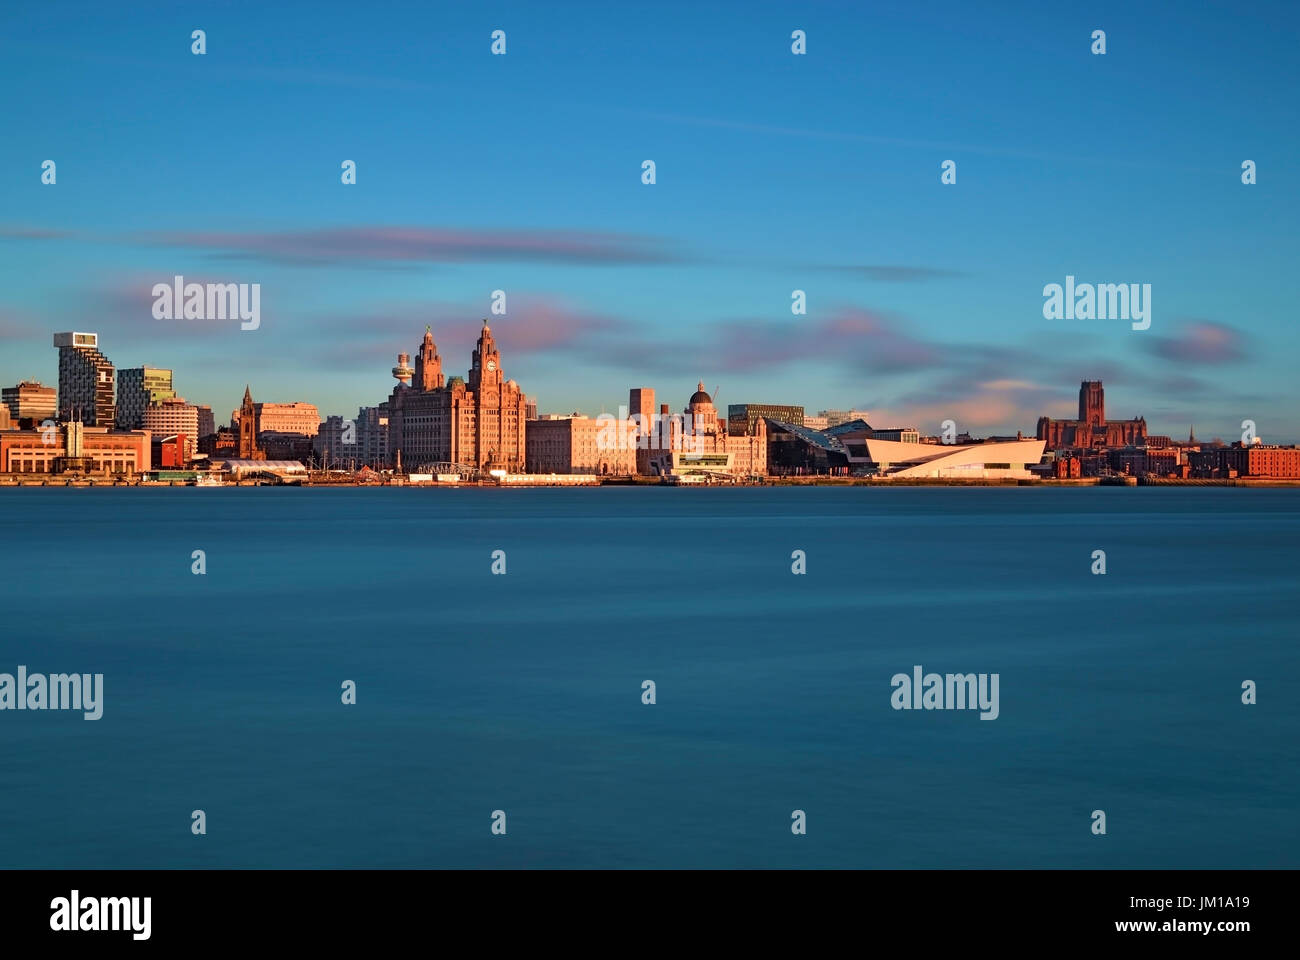 An evening view looking across the River Mersey to Liverpool waterfront Stock Photo